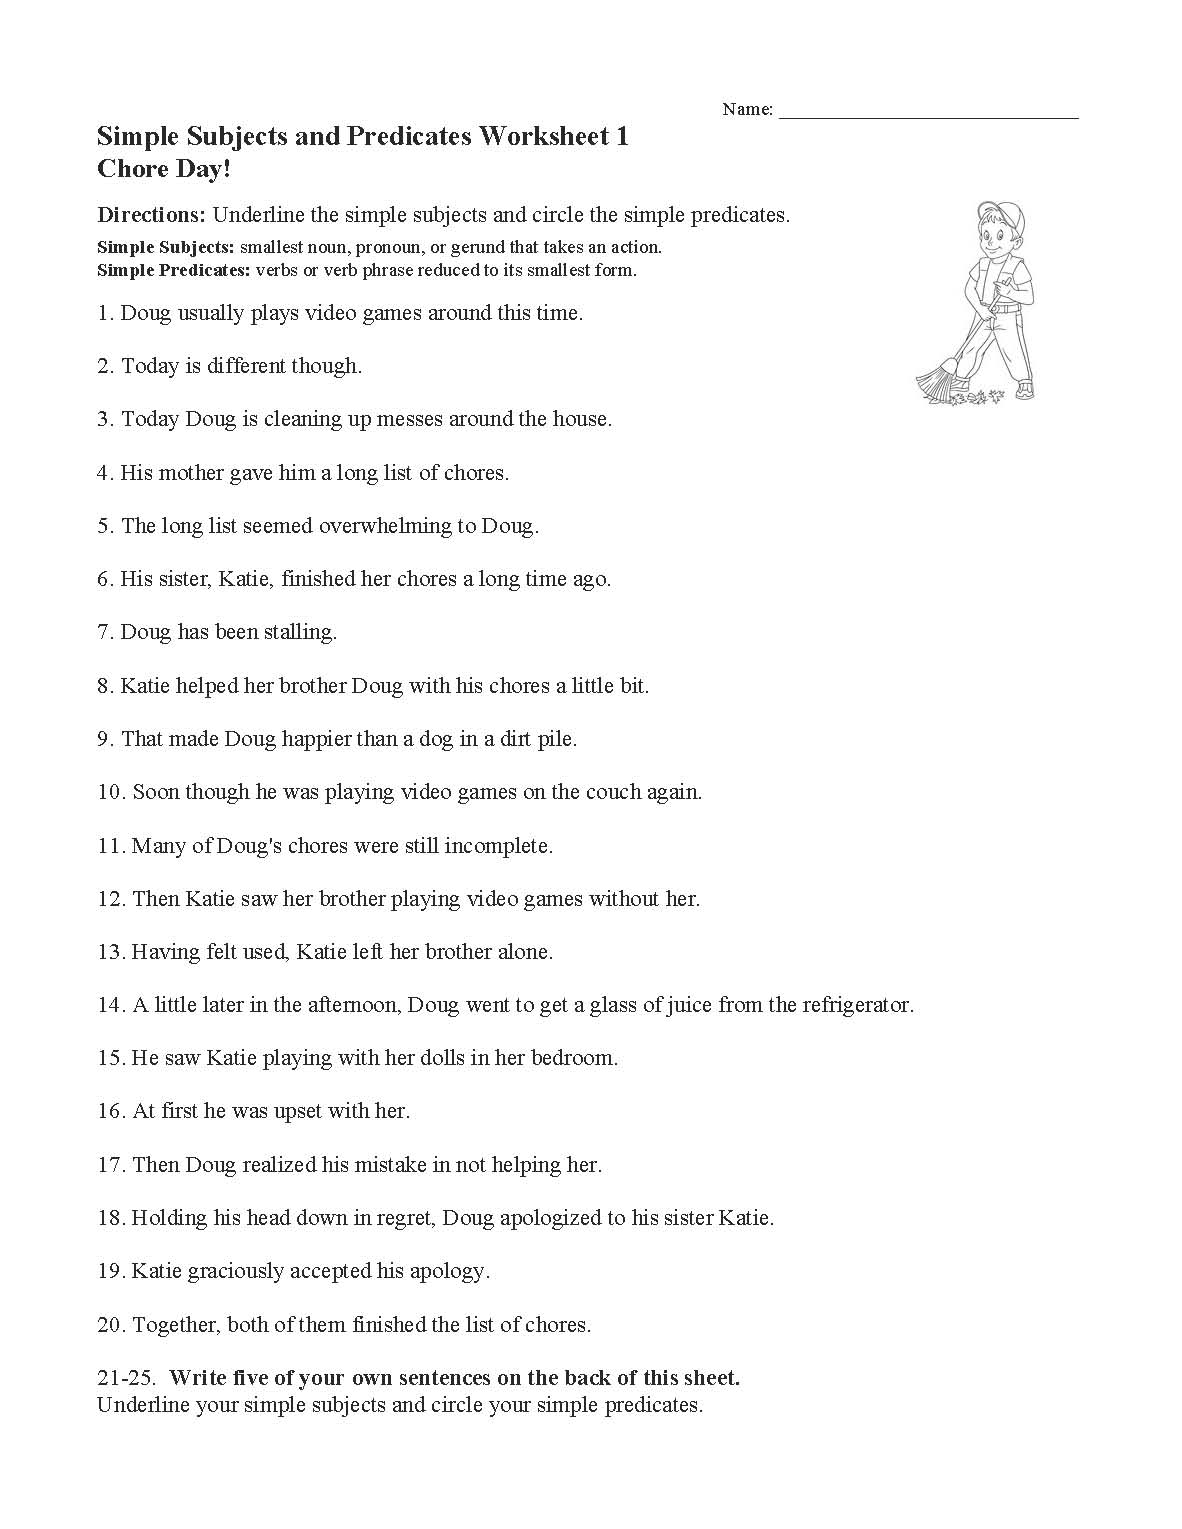 Simple Subjects And Predicates Worksheet 1 Preview